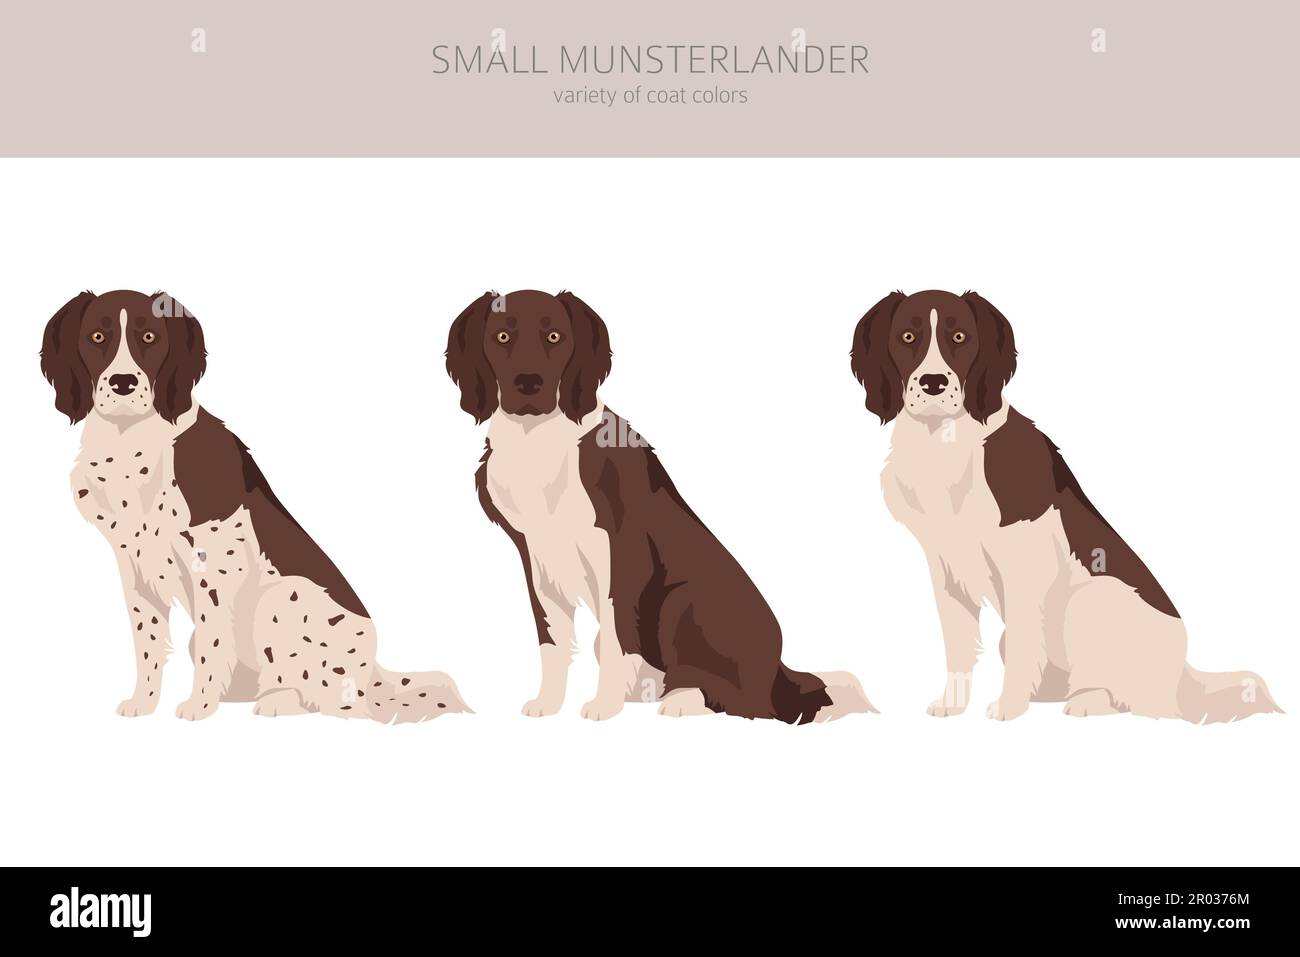 Small Munsterlander coat colors, different poses clipart.  Vector illustration Stock Vector